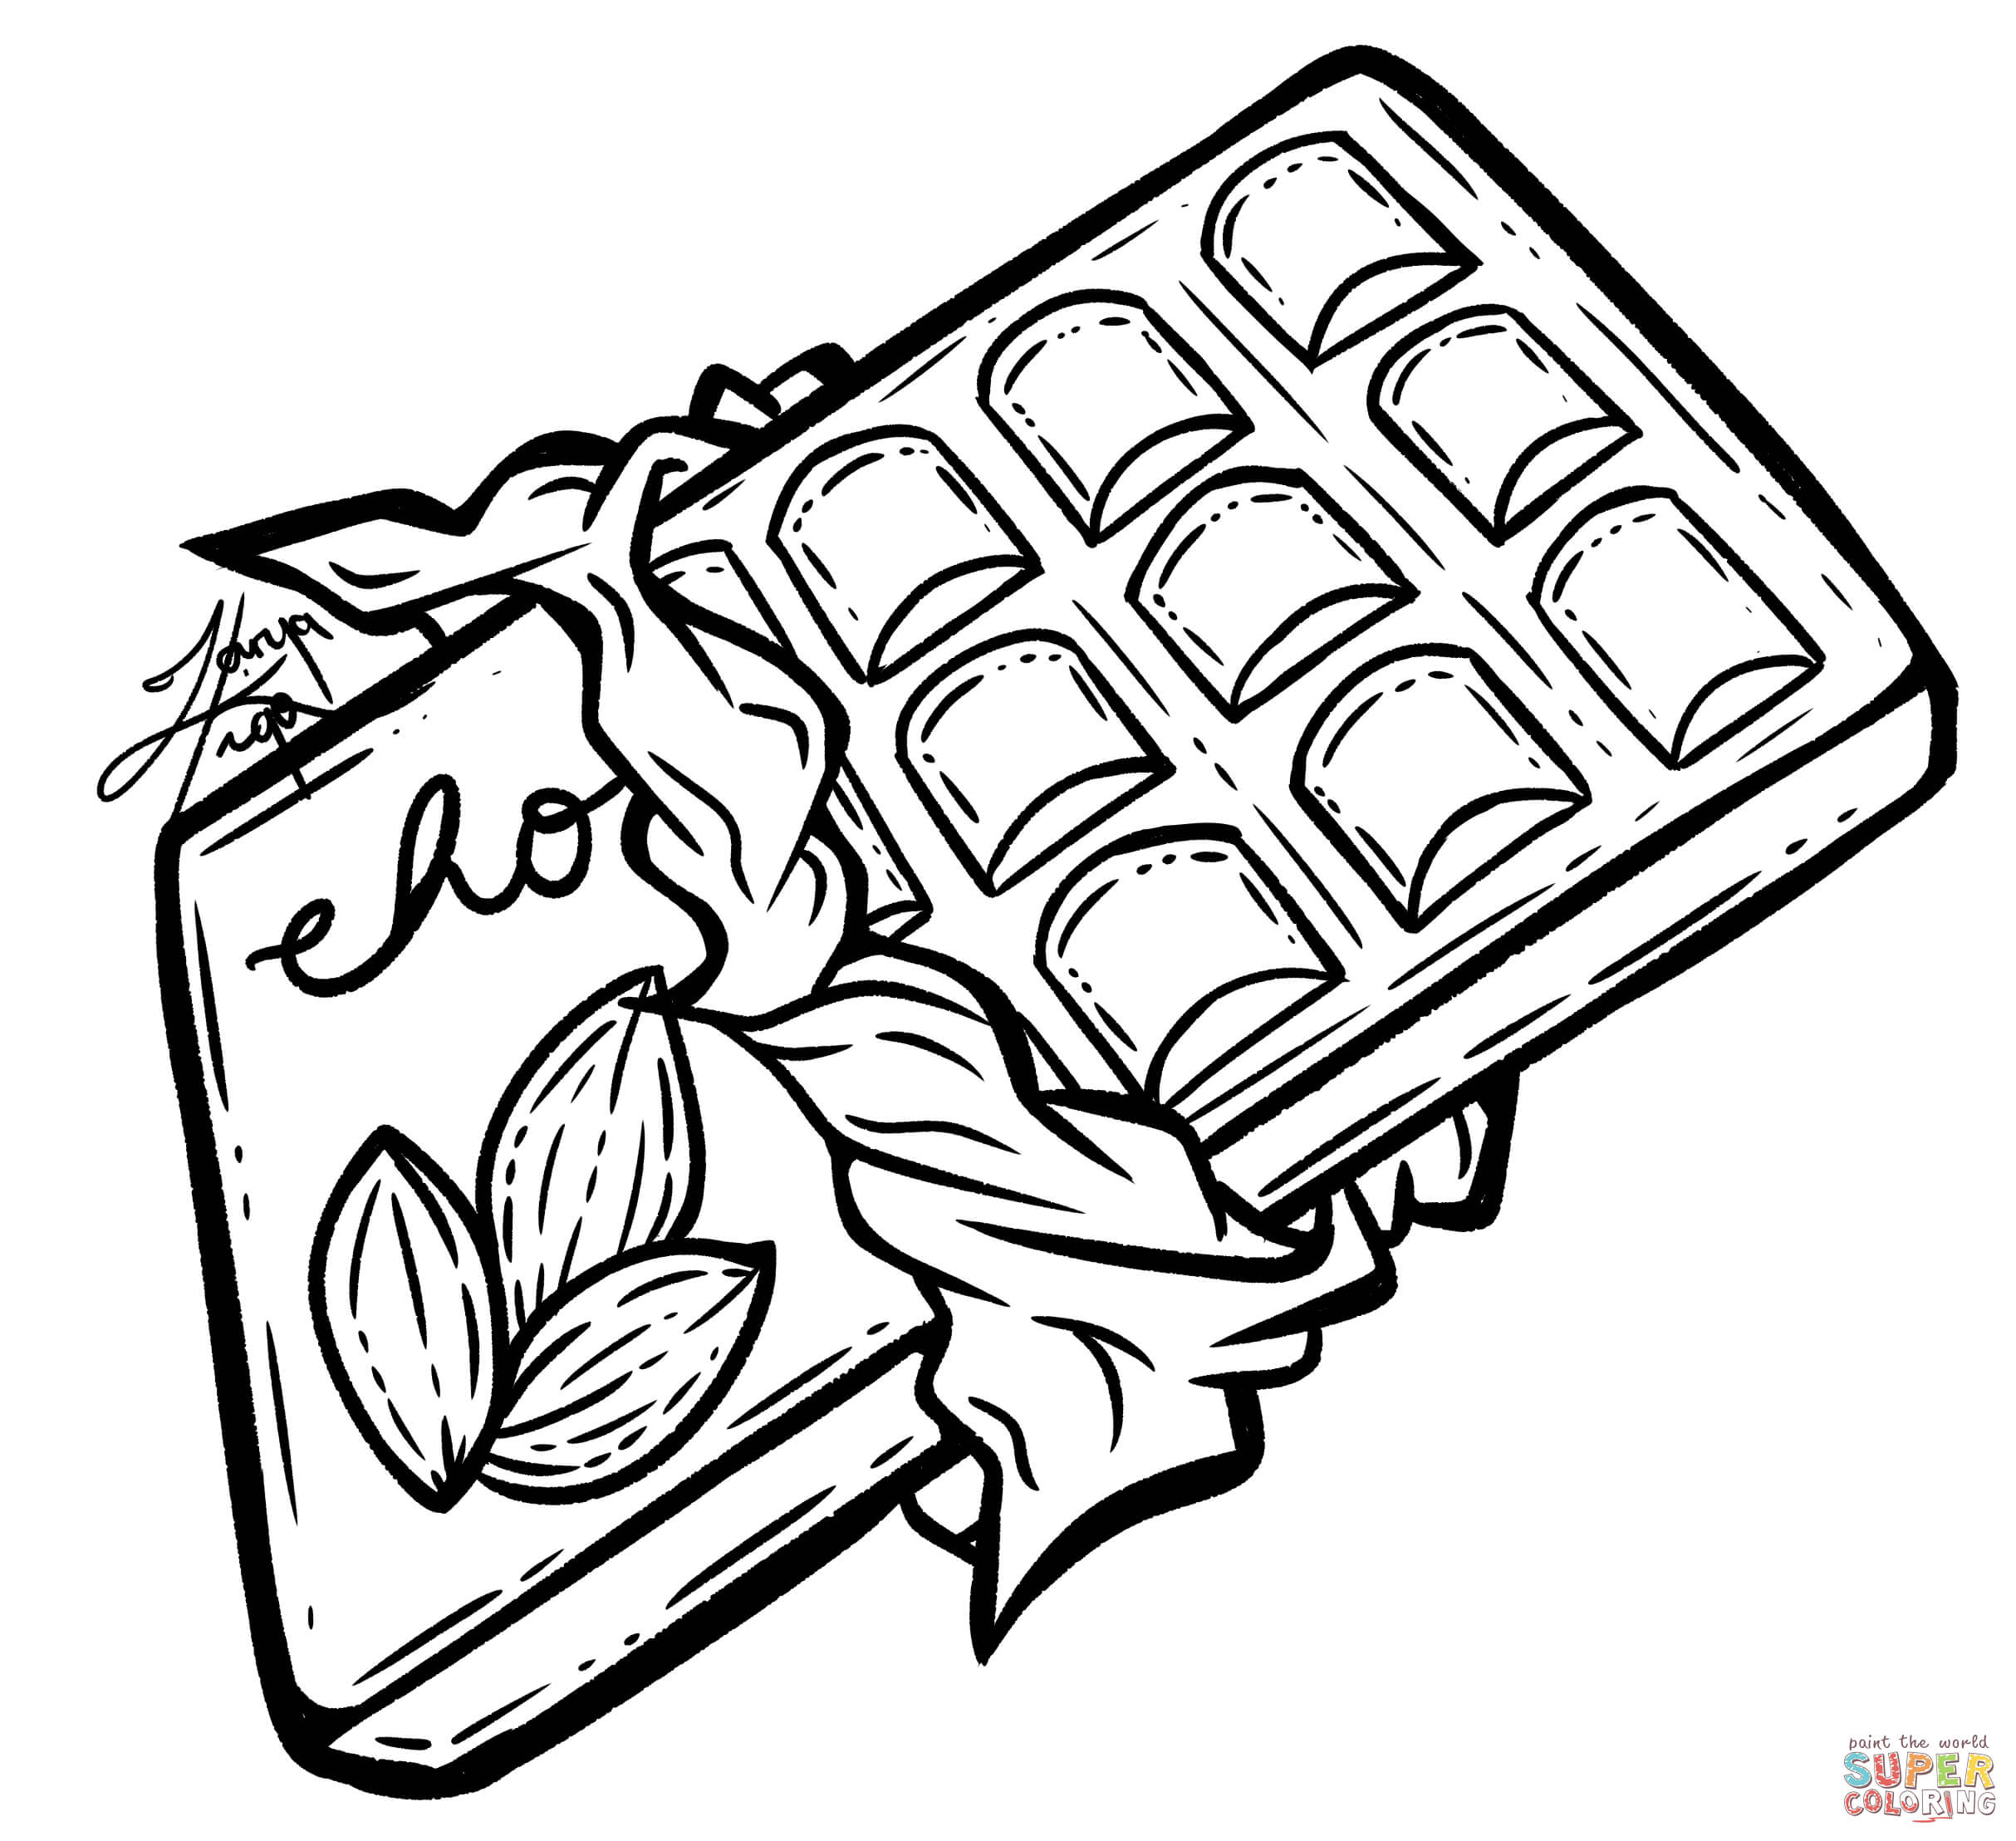 Choco Bar coloring page | Free Printable Coloring Pages